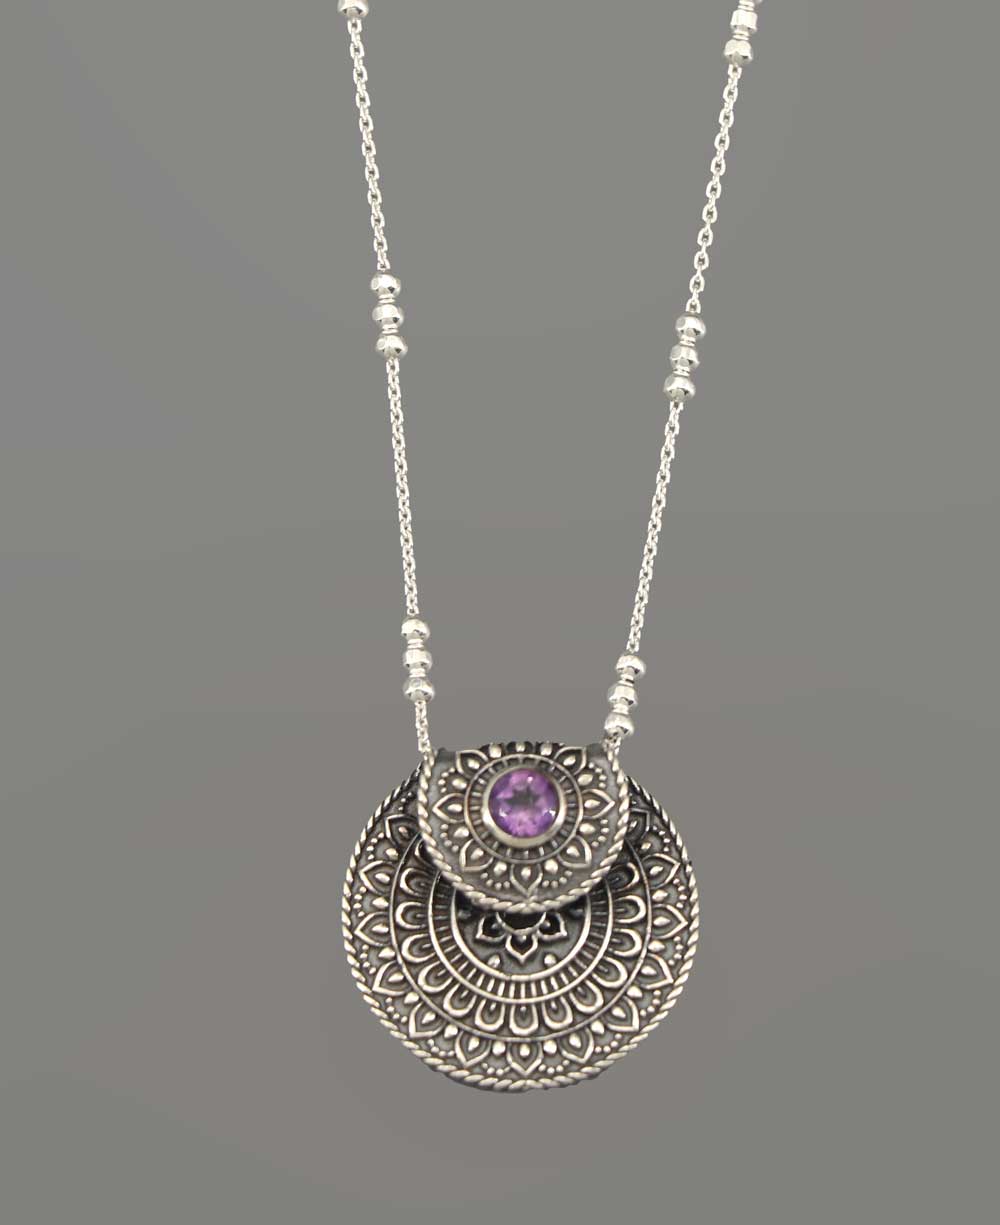 Inspirational Sterling Silver Mandala Necklace with Amethyst - Necklaces 16"+2"